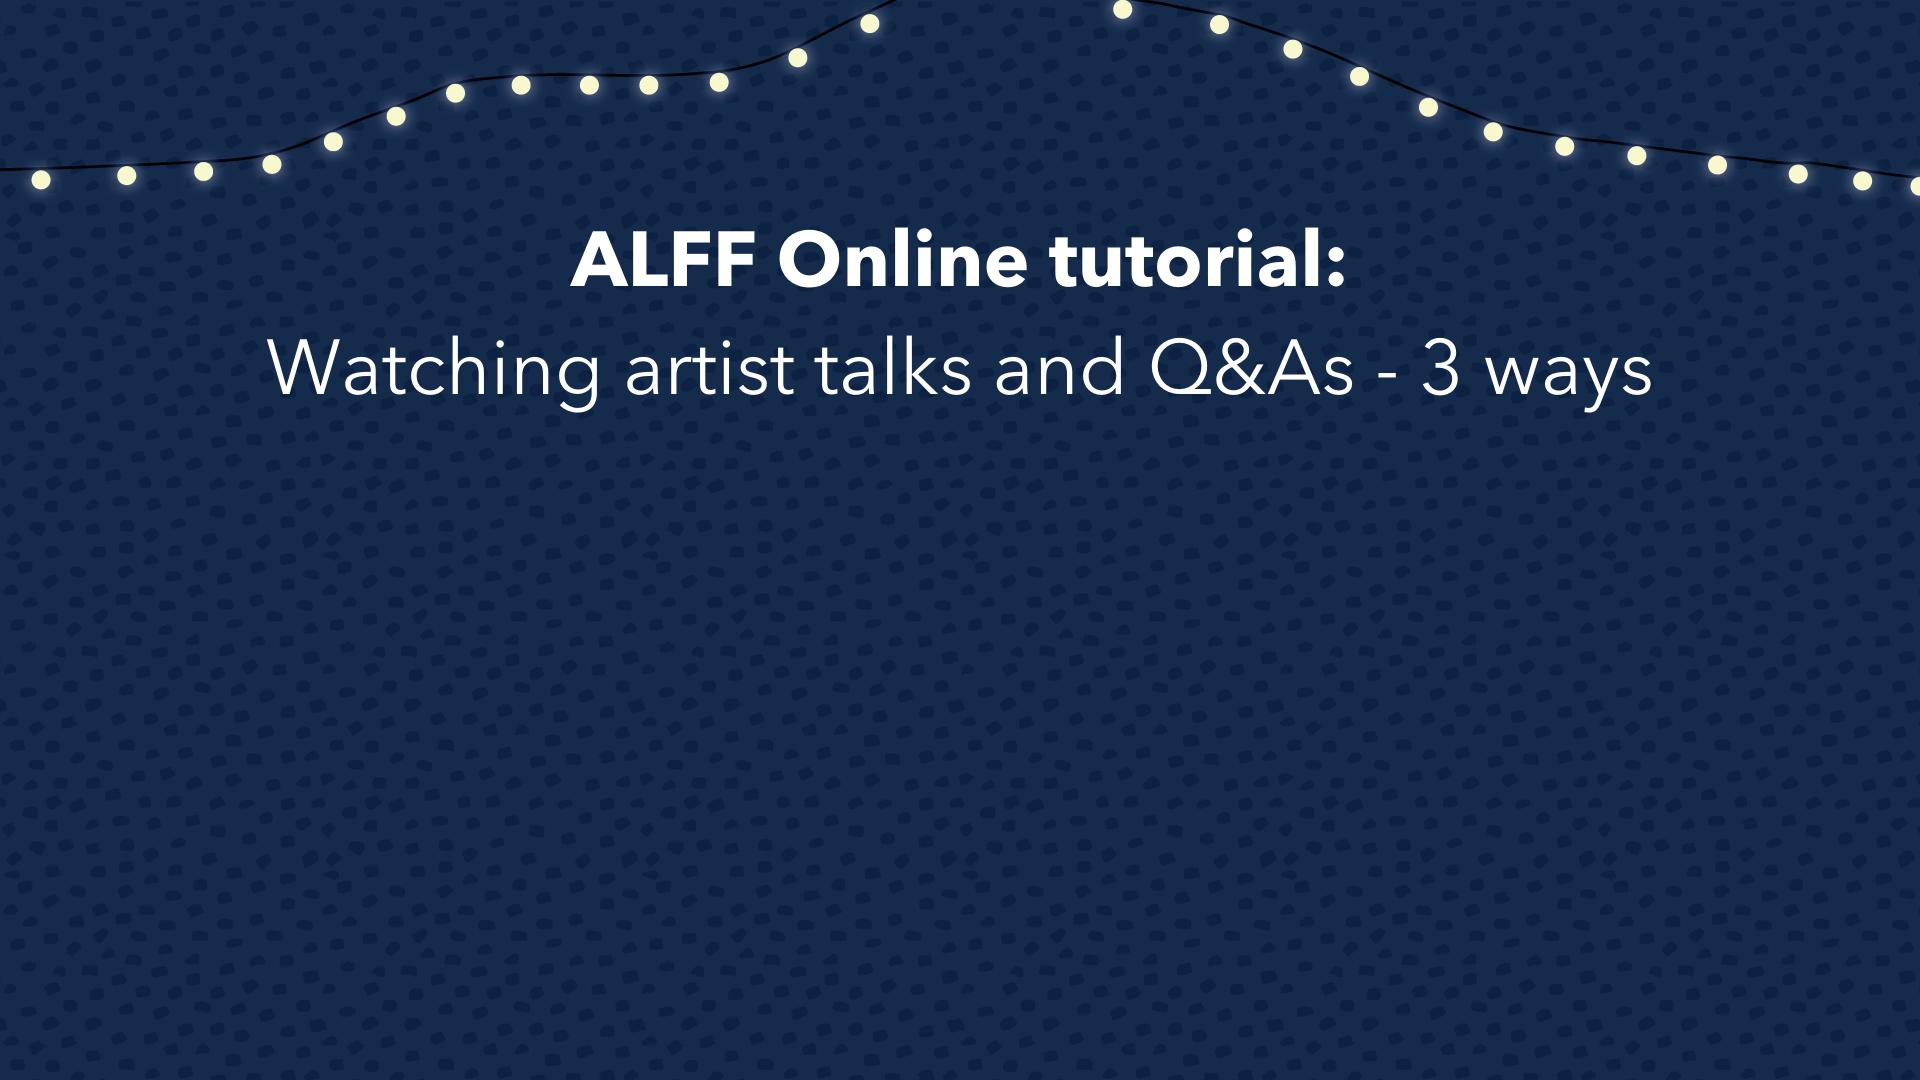 How to: Watch artist talks and Q&As